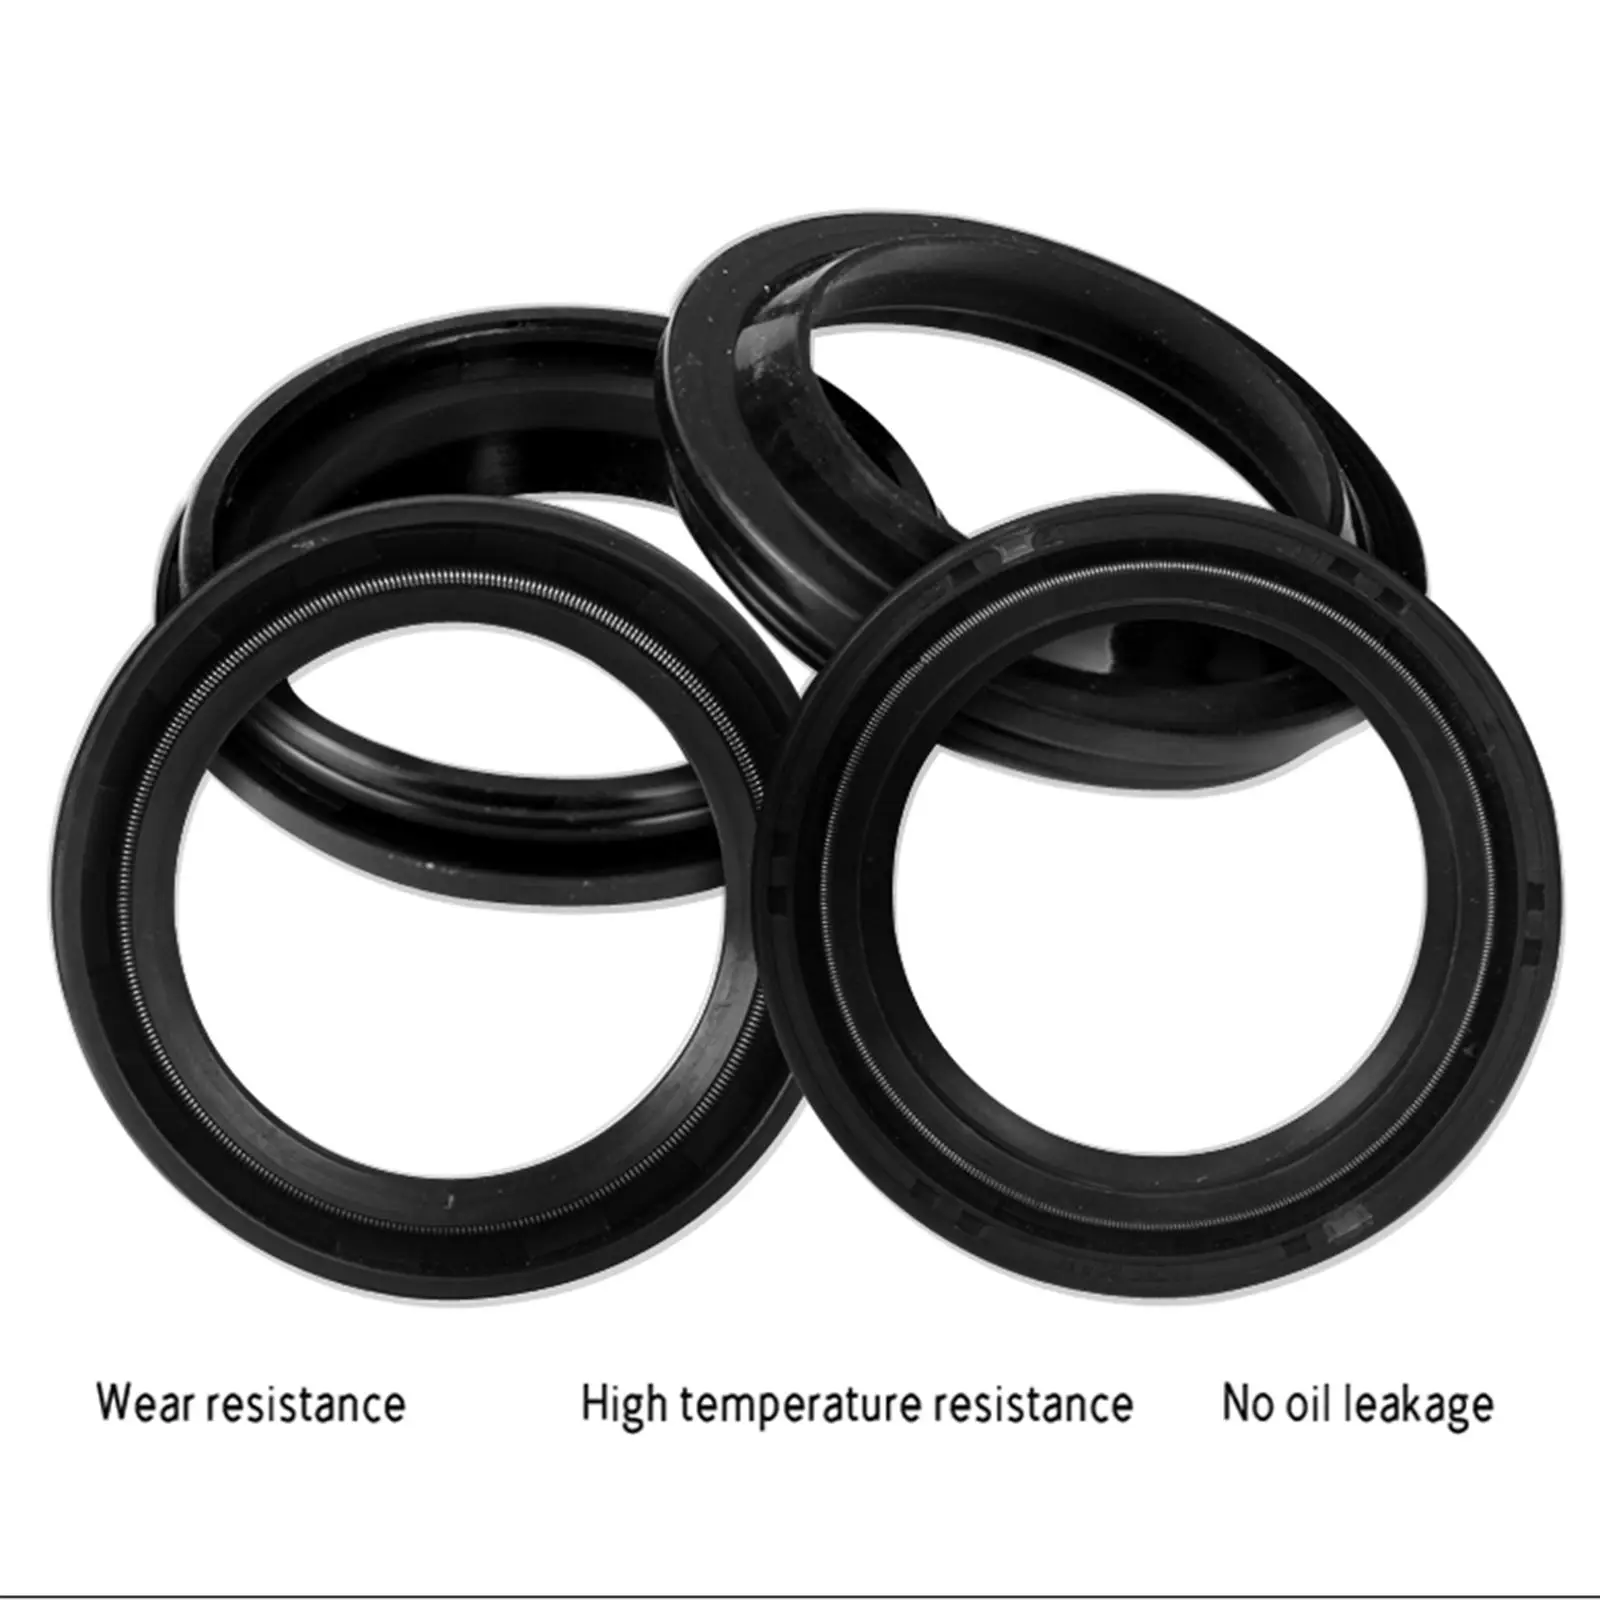 Front Fork Oil Seal and Dust Seal Set Kit 39x52x11mm for 3XV R1 Kawasaki  250 52X39-11